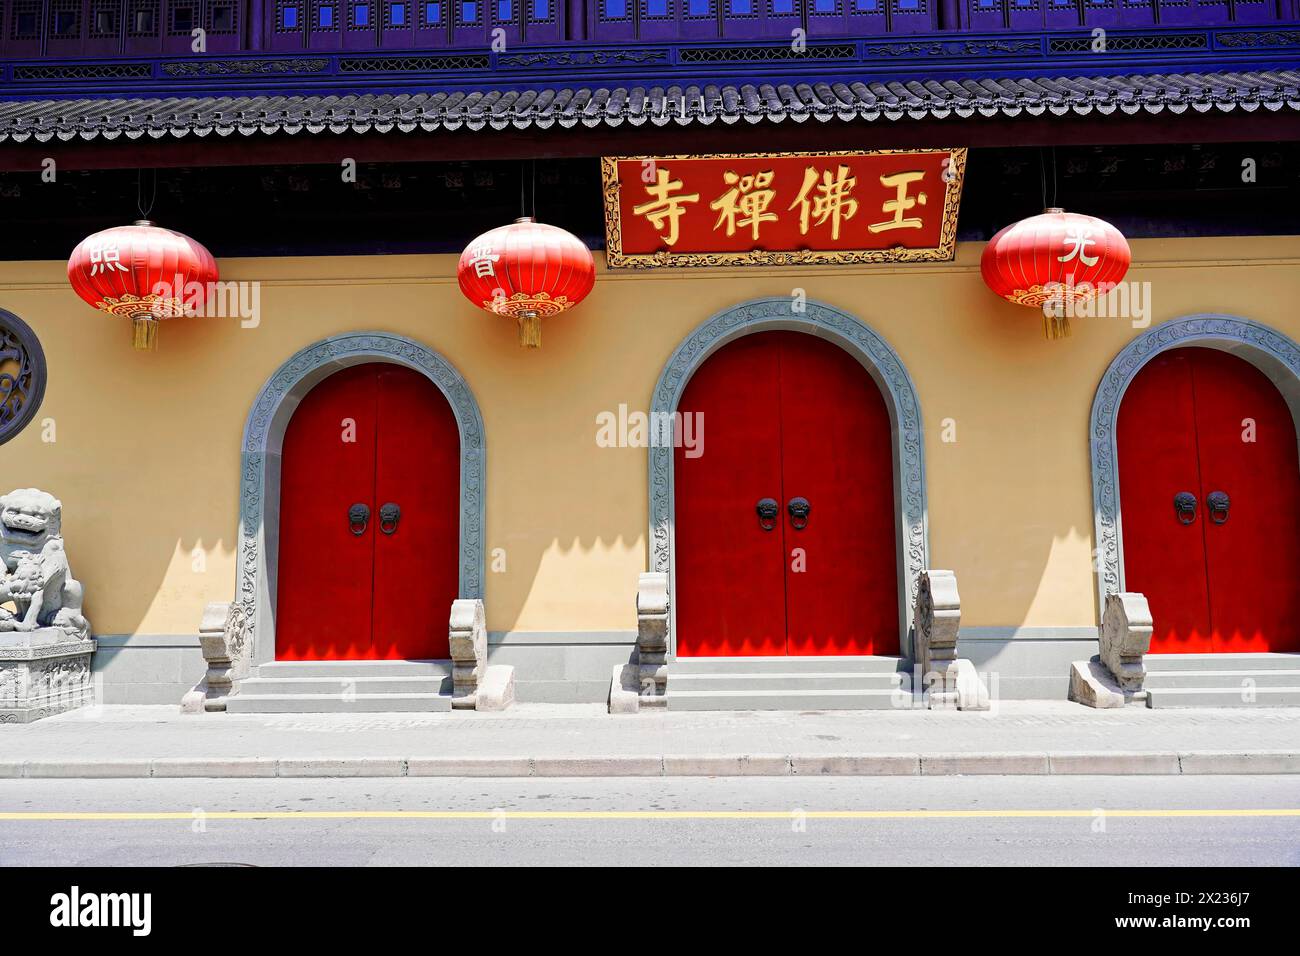 Jade Buddha Temple, Shanghai, Red doors and lanterns on a wall with traditional Chinese architecture, Shanghai, China Stock Photo